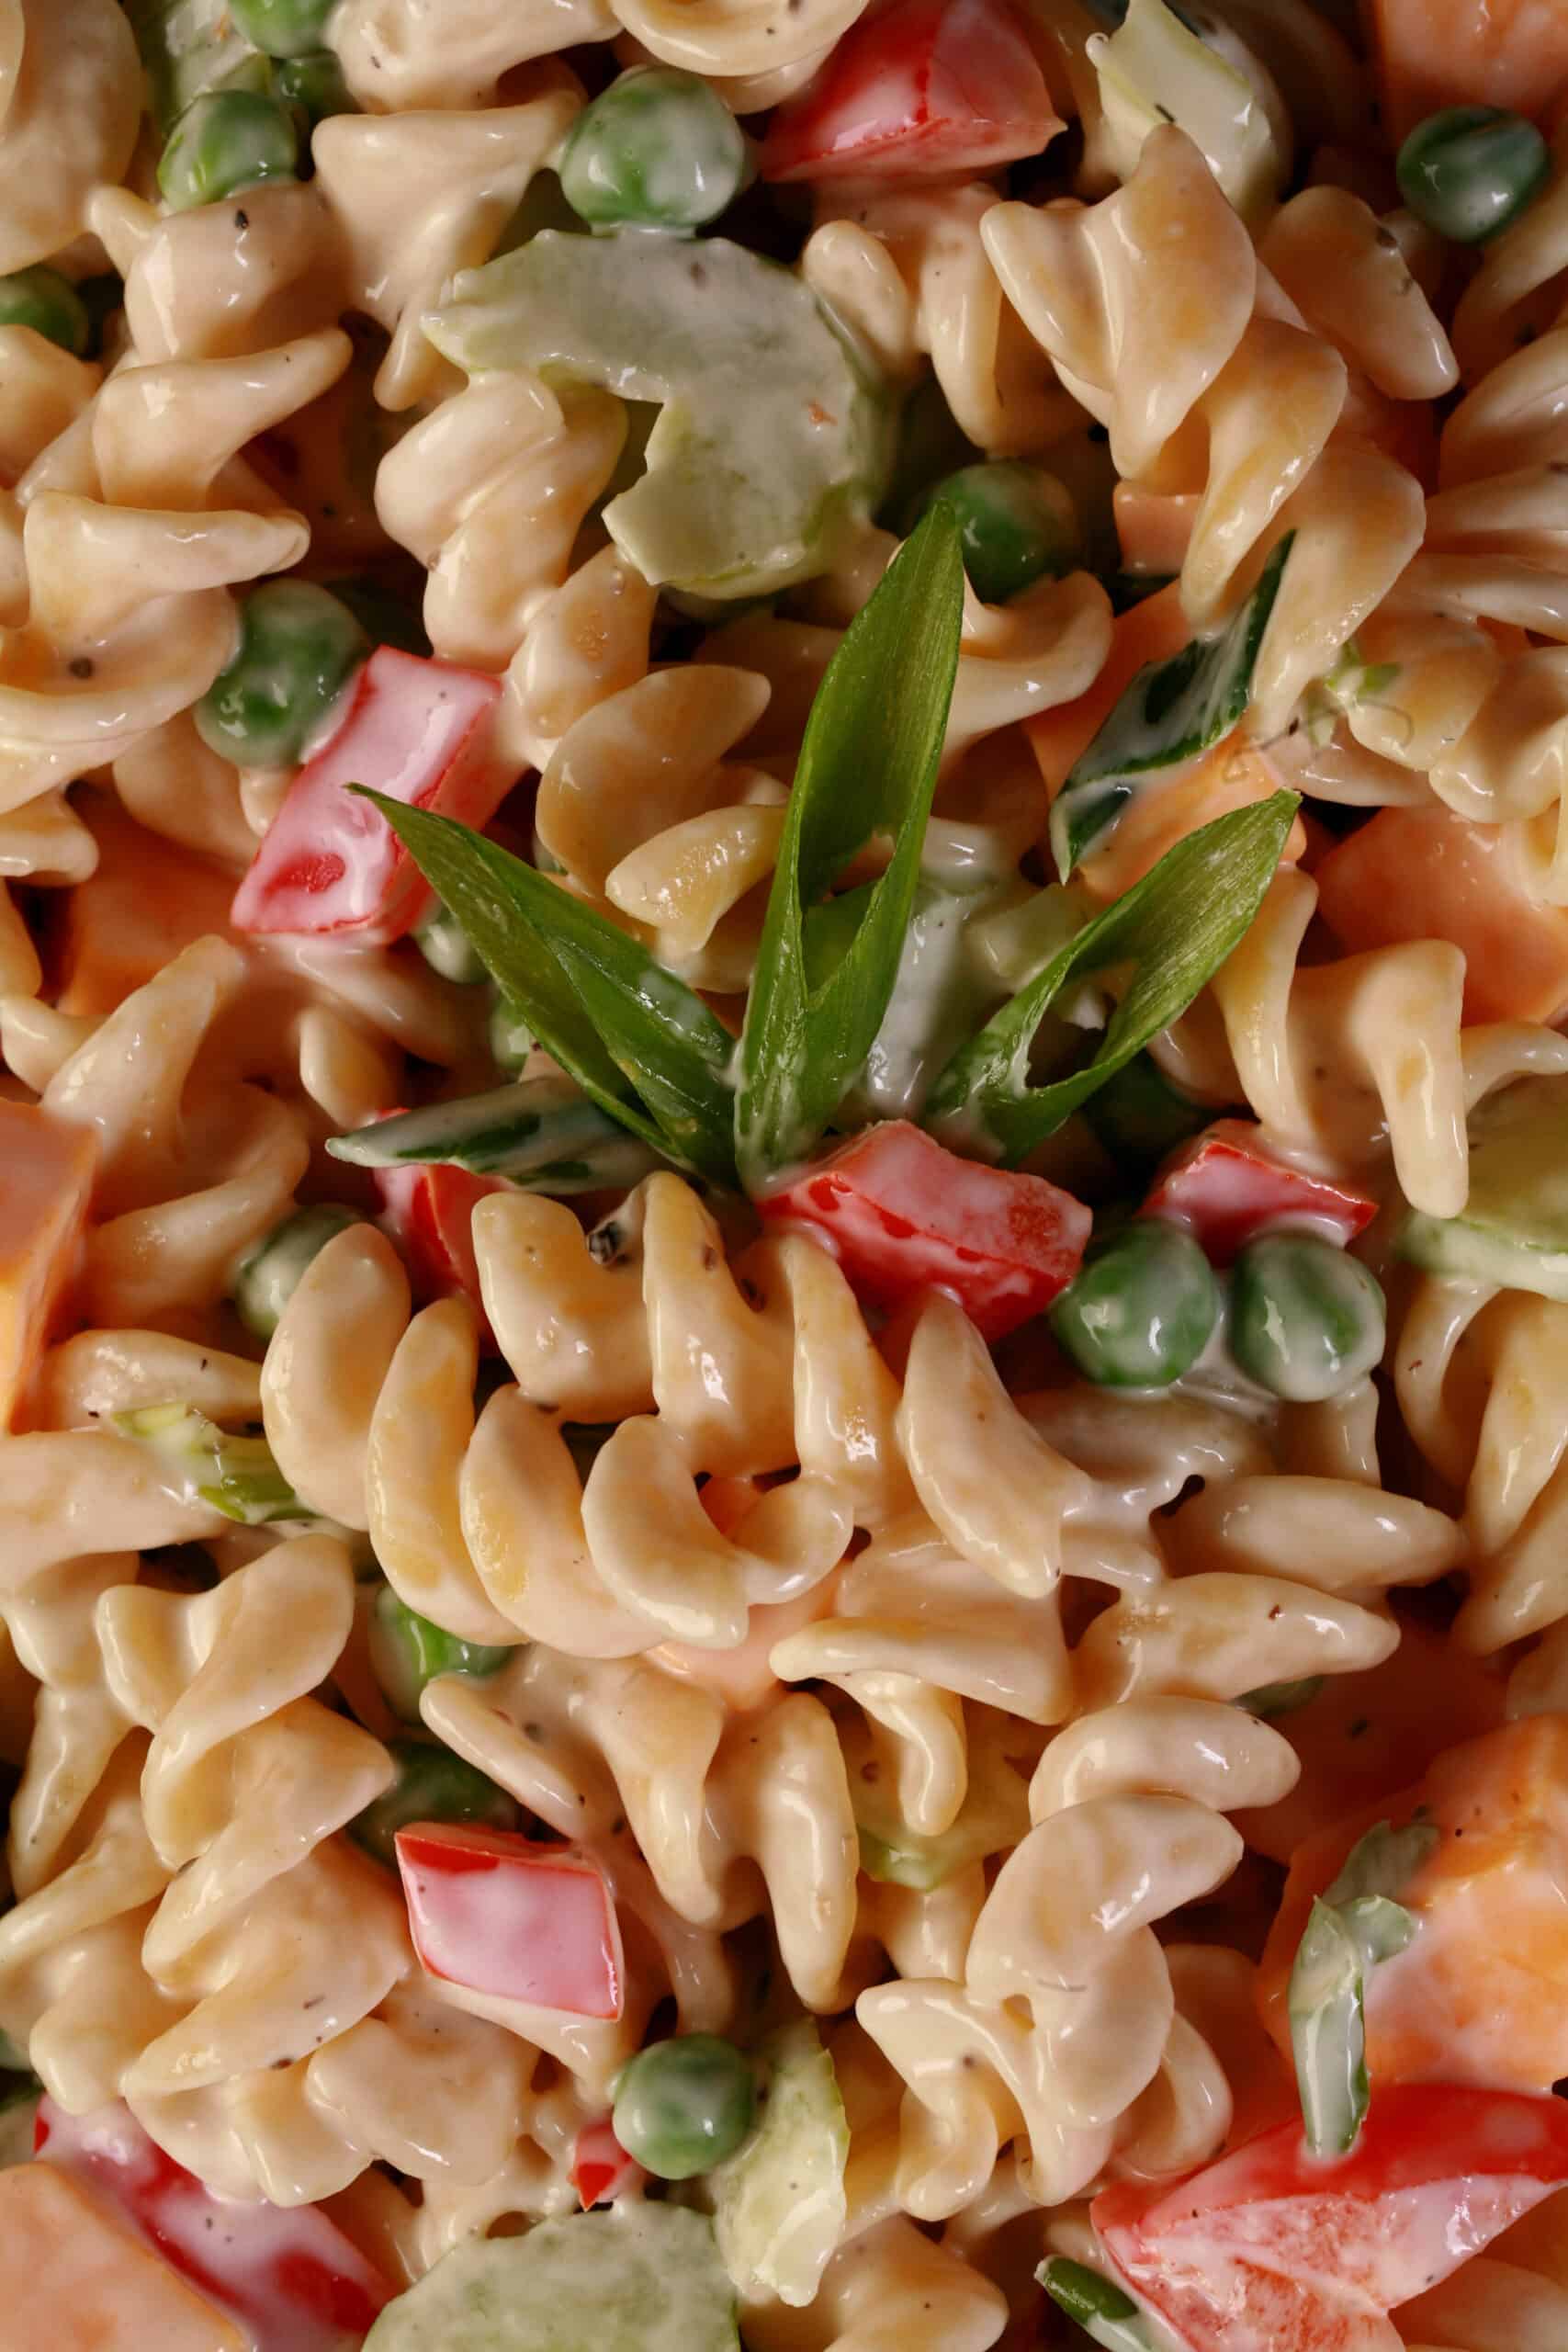 A close up view of a creamy pasta salad made with rotini, red peppers, celery, cheese, peas, and green onions.